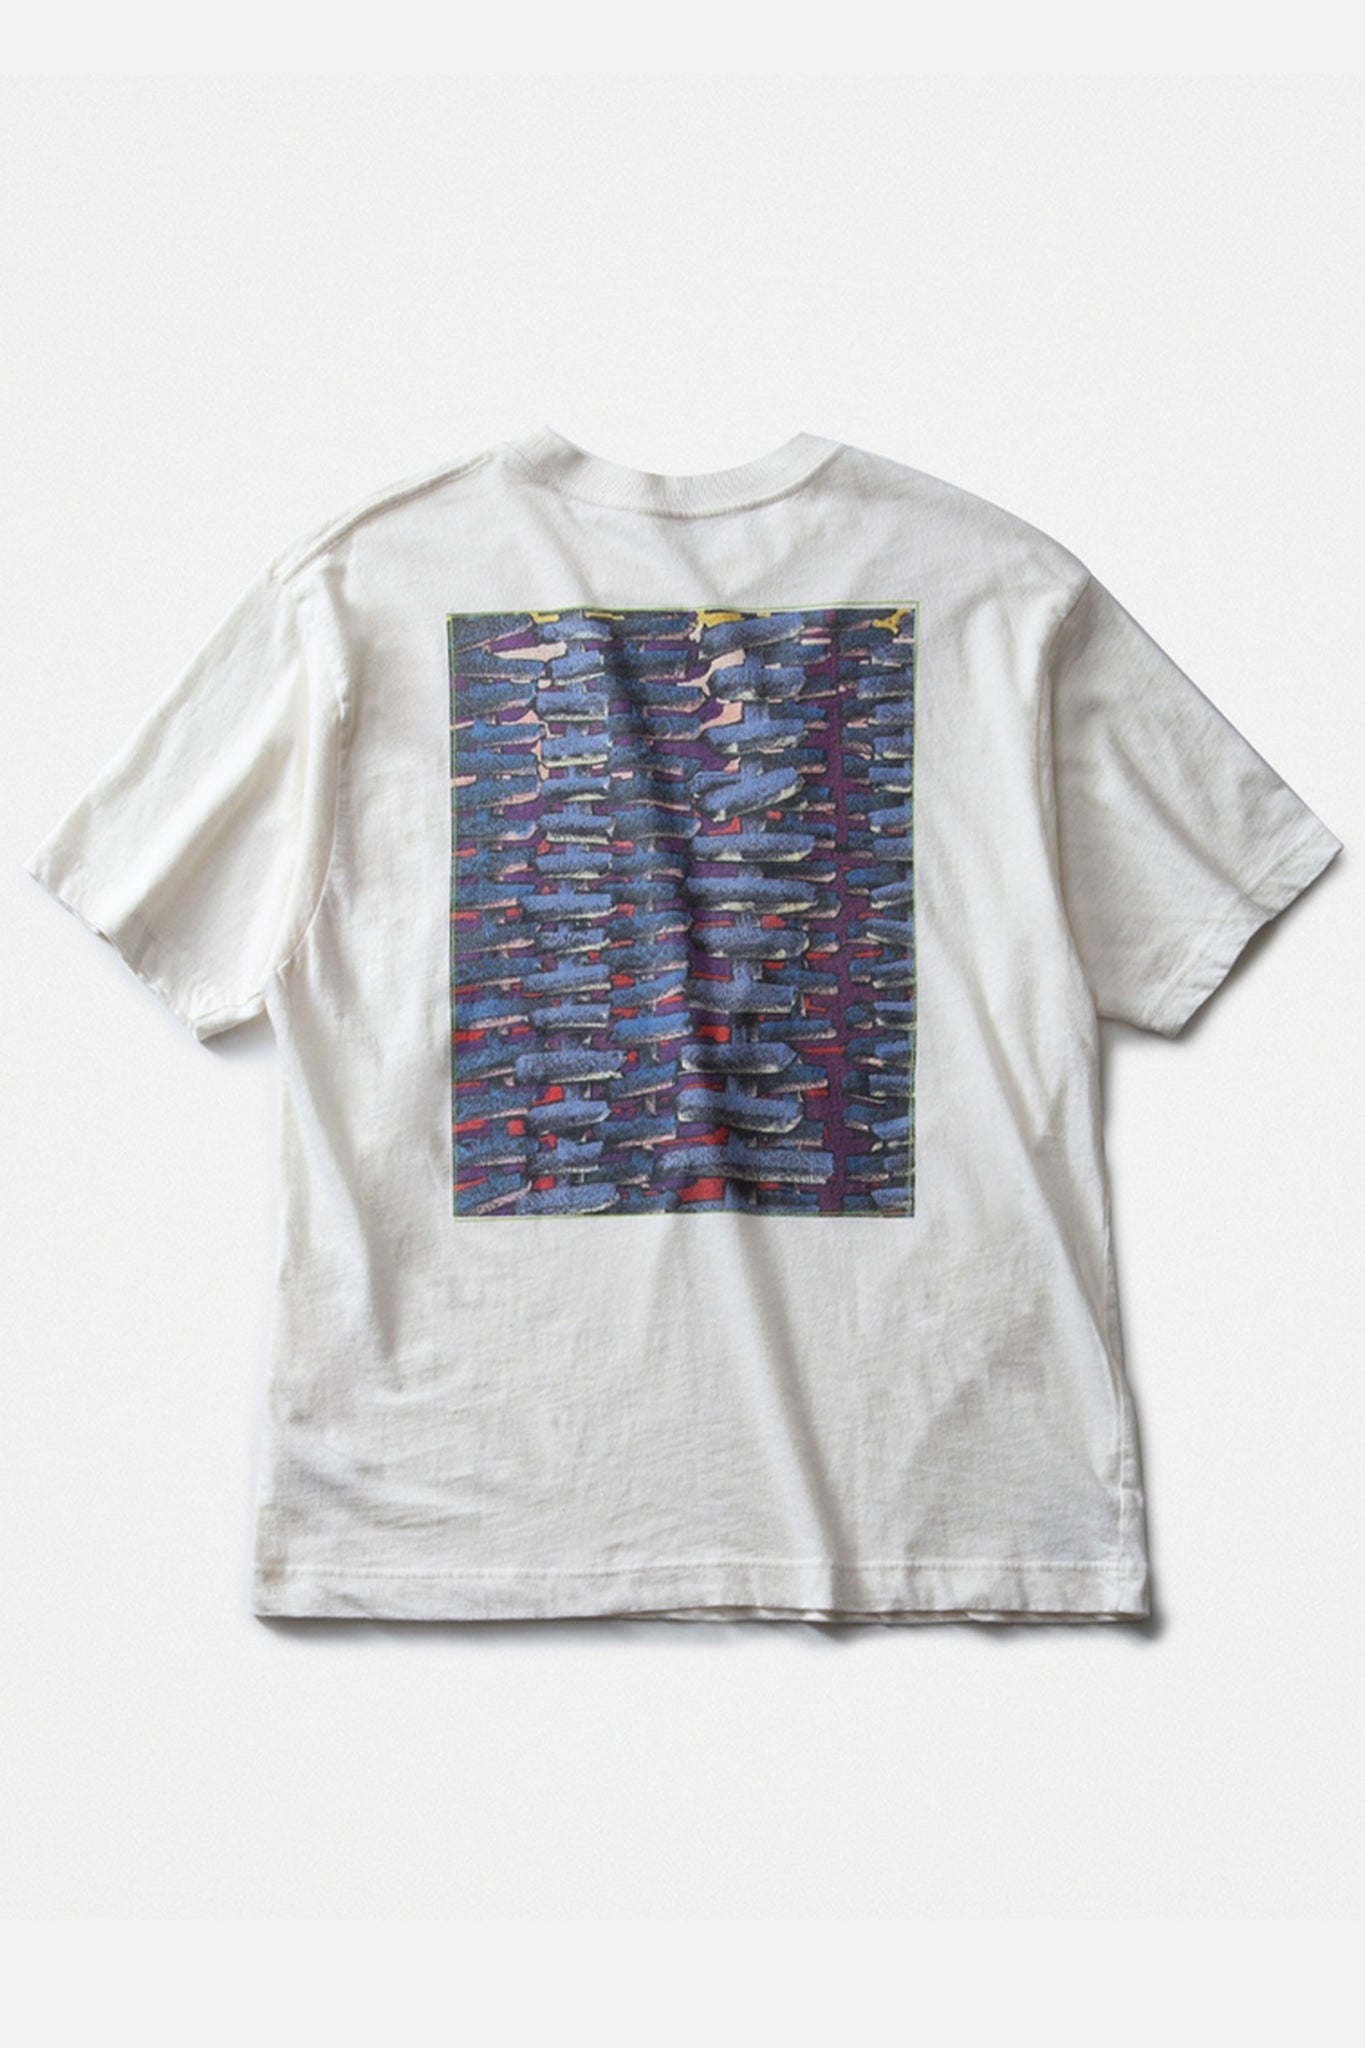 THE INOUE BROTHERS... "JULIEN COLOMBIER INTERACTION MULTIPLE T-SHIRT/WHITE"